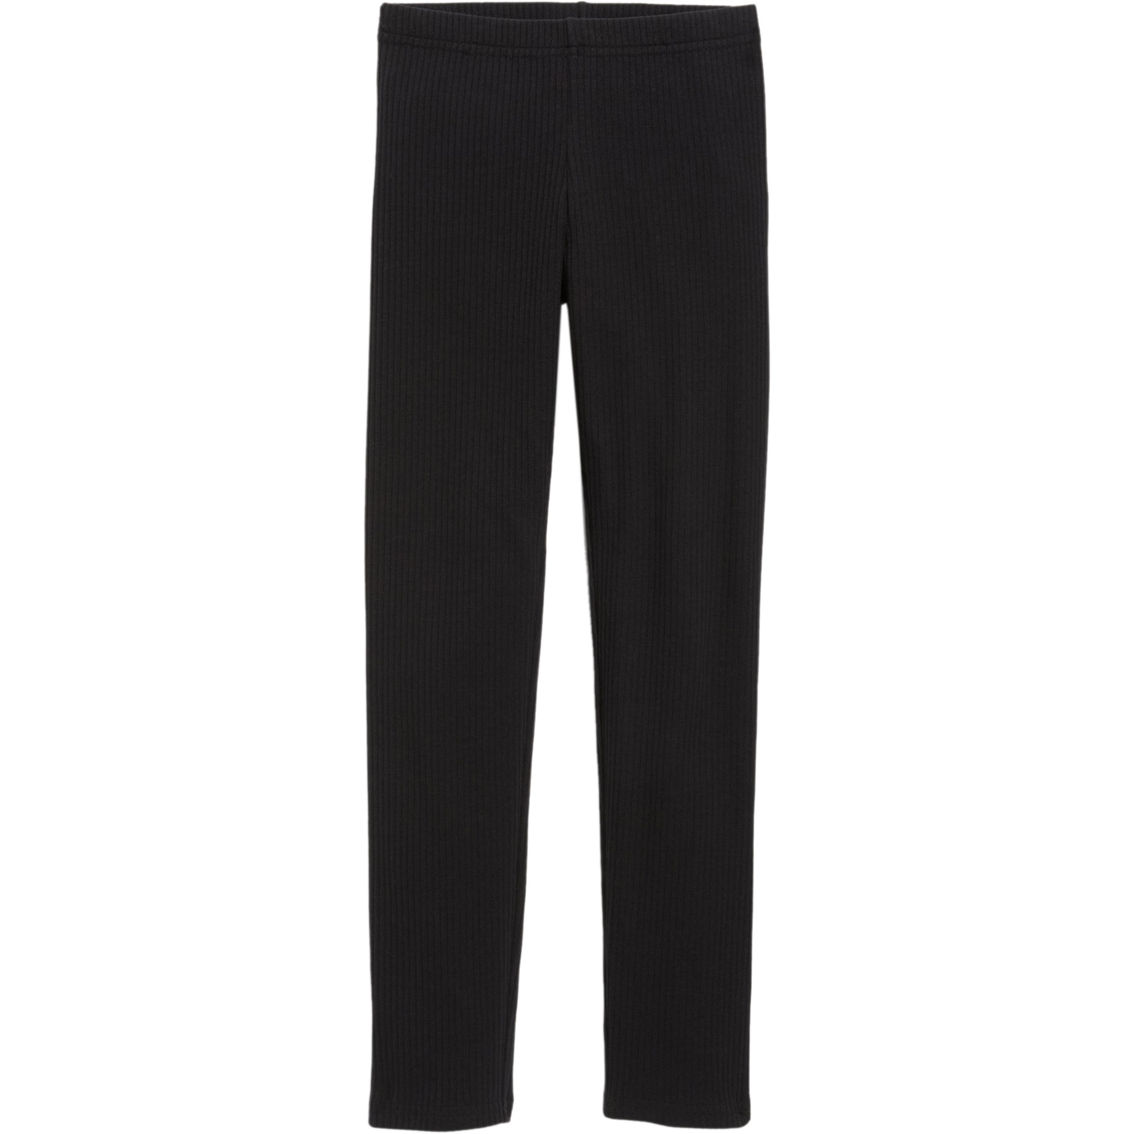 Old Navy Girls Ribbed Leggings | Girls 7-16 | Clothing & Accessories ...